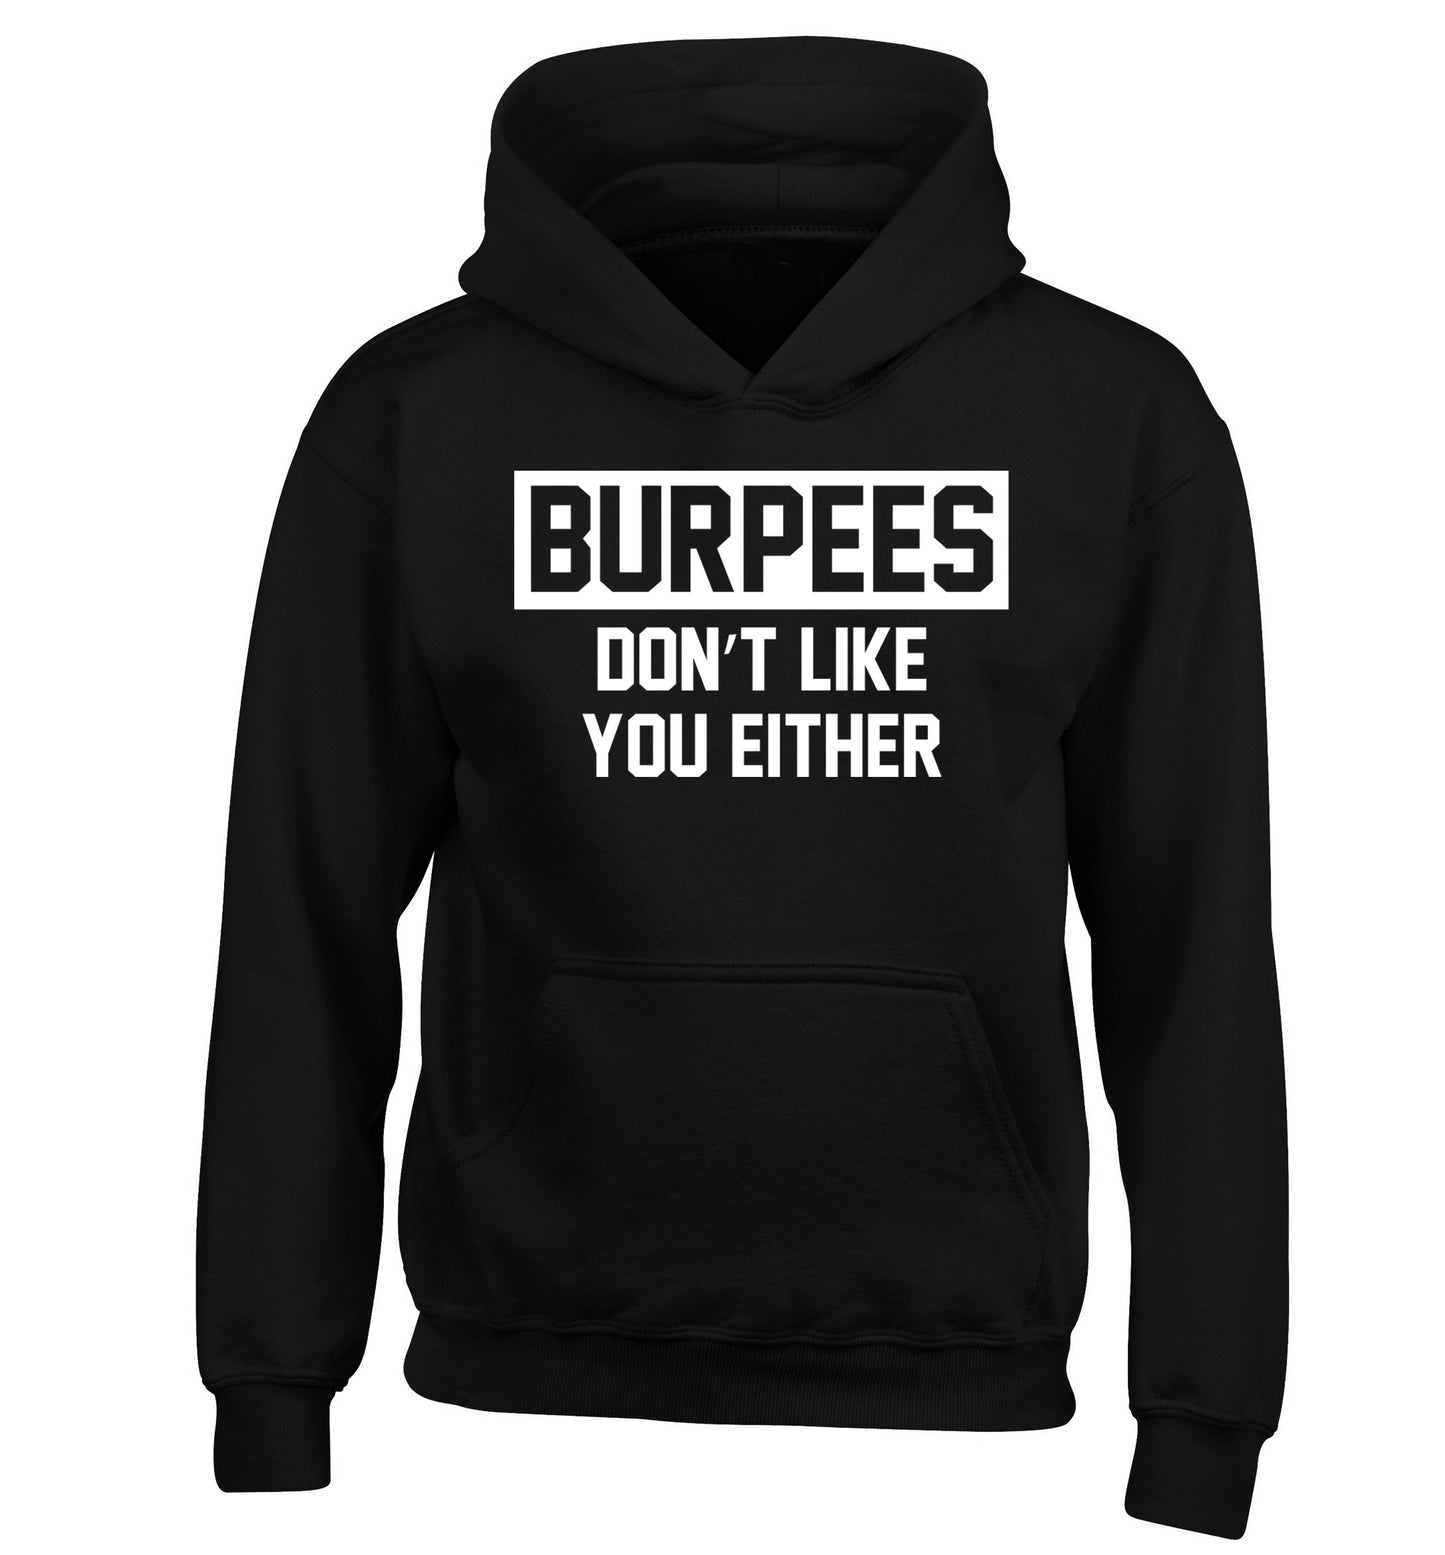 Burpees don't like you either children's black hoodie 12-14 Years